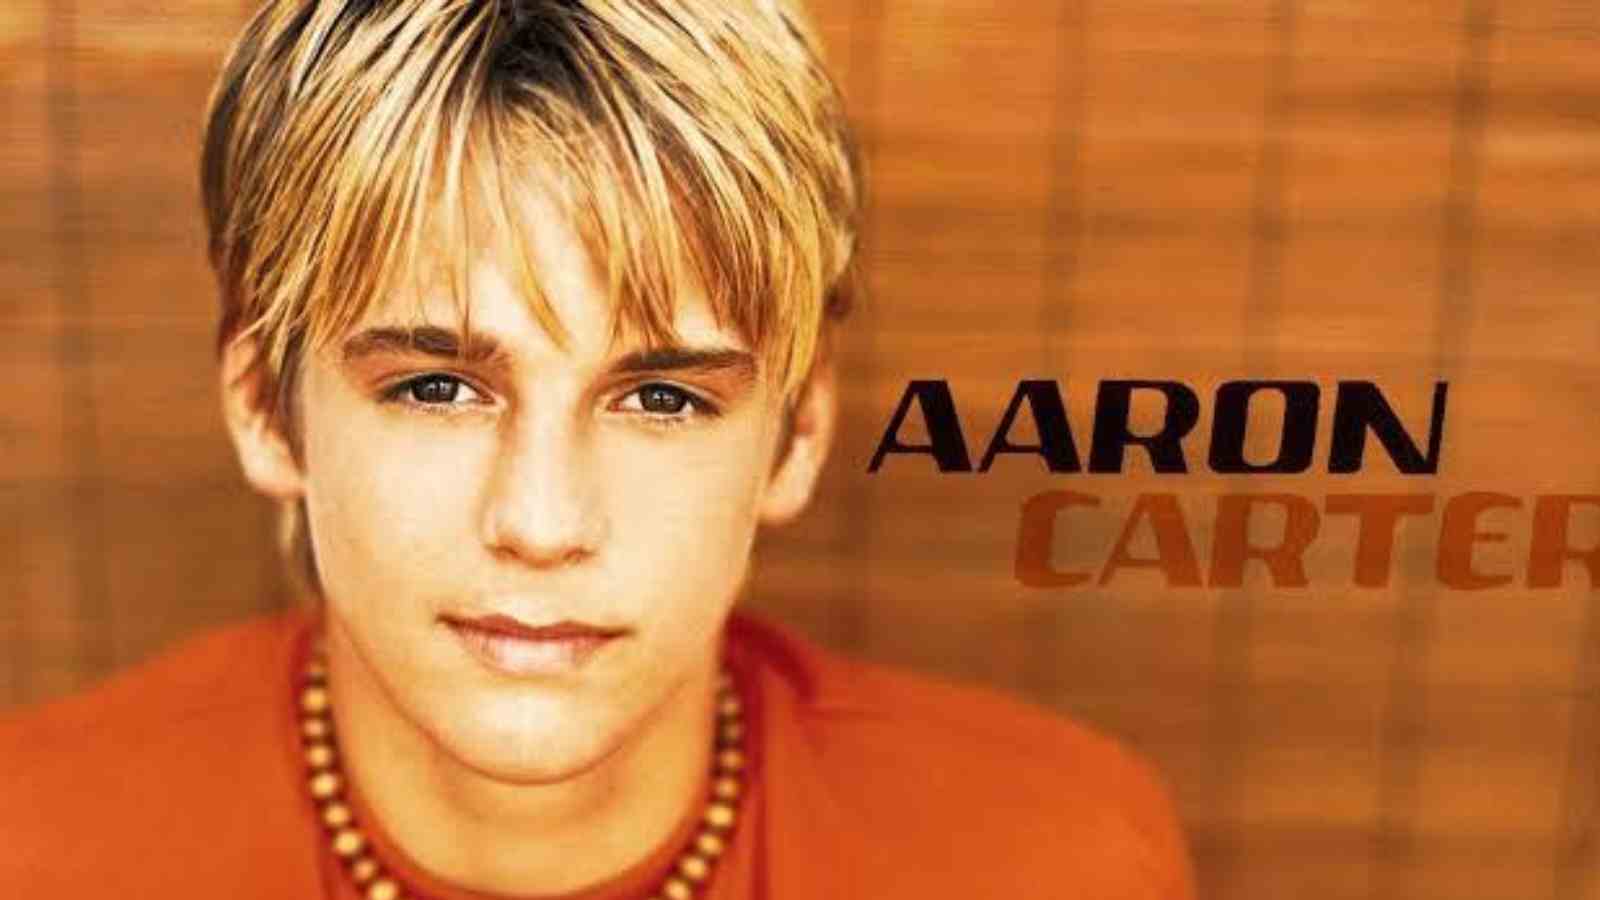 How much did the singer and rapper Aaron Carter earn?